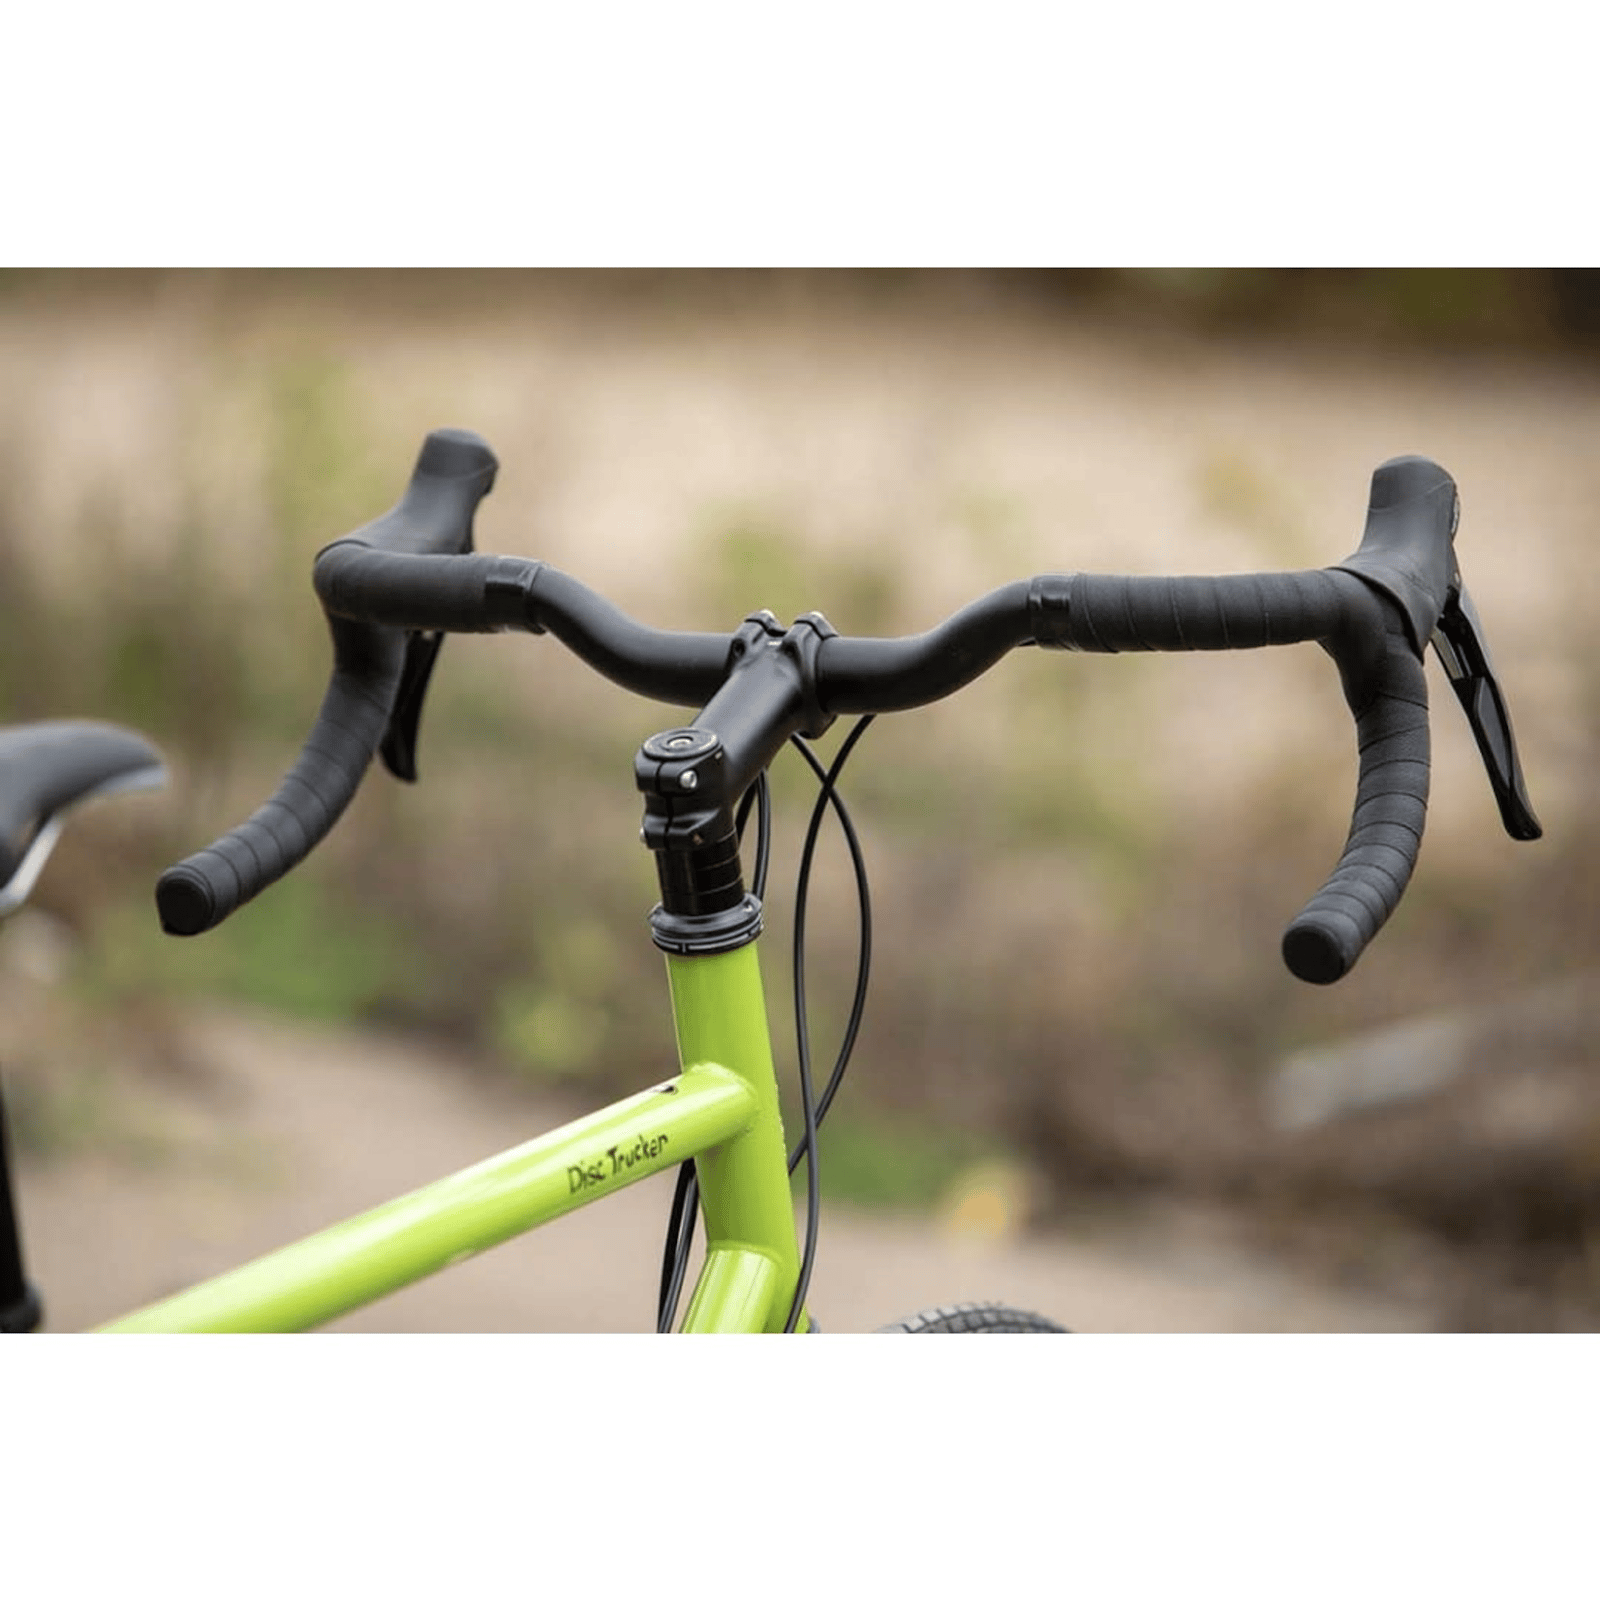 Surly Truck Stop Bars are suitable drop bars if you will be needing extra stability when riding your mountain bike on smoother terrain.